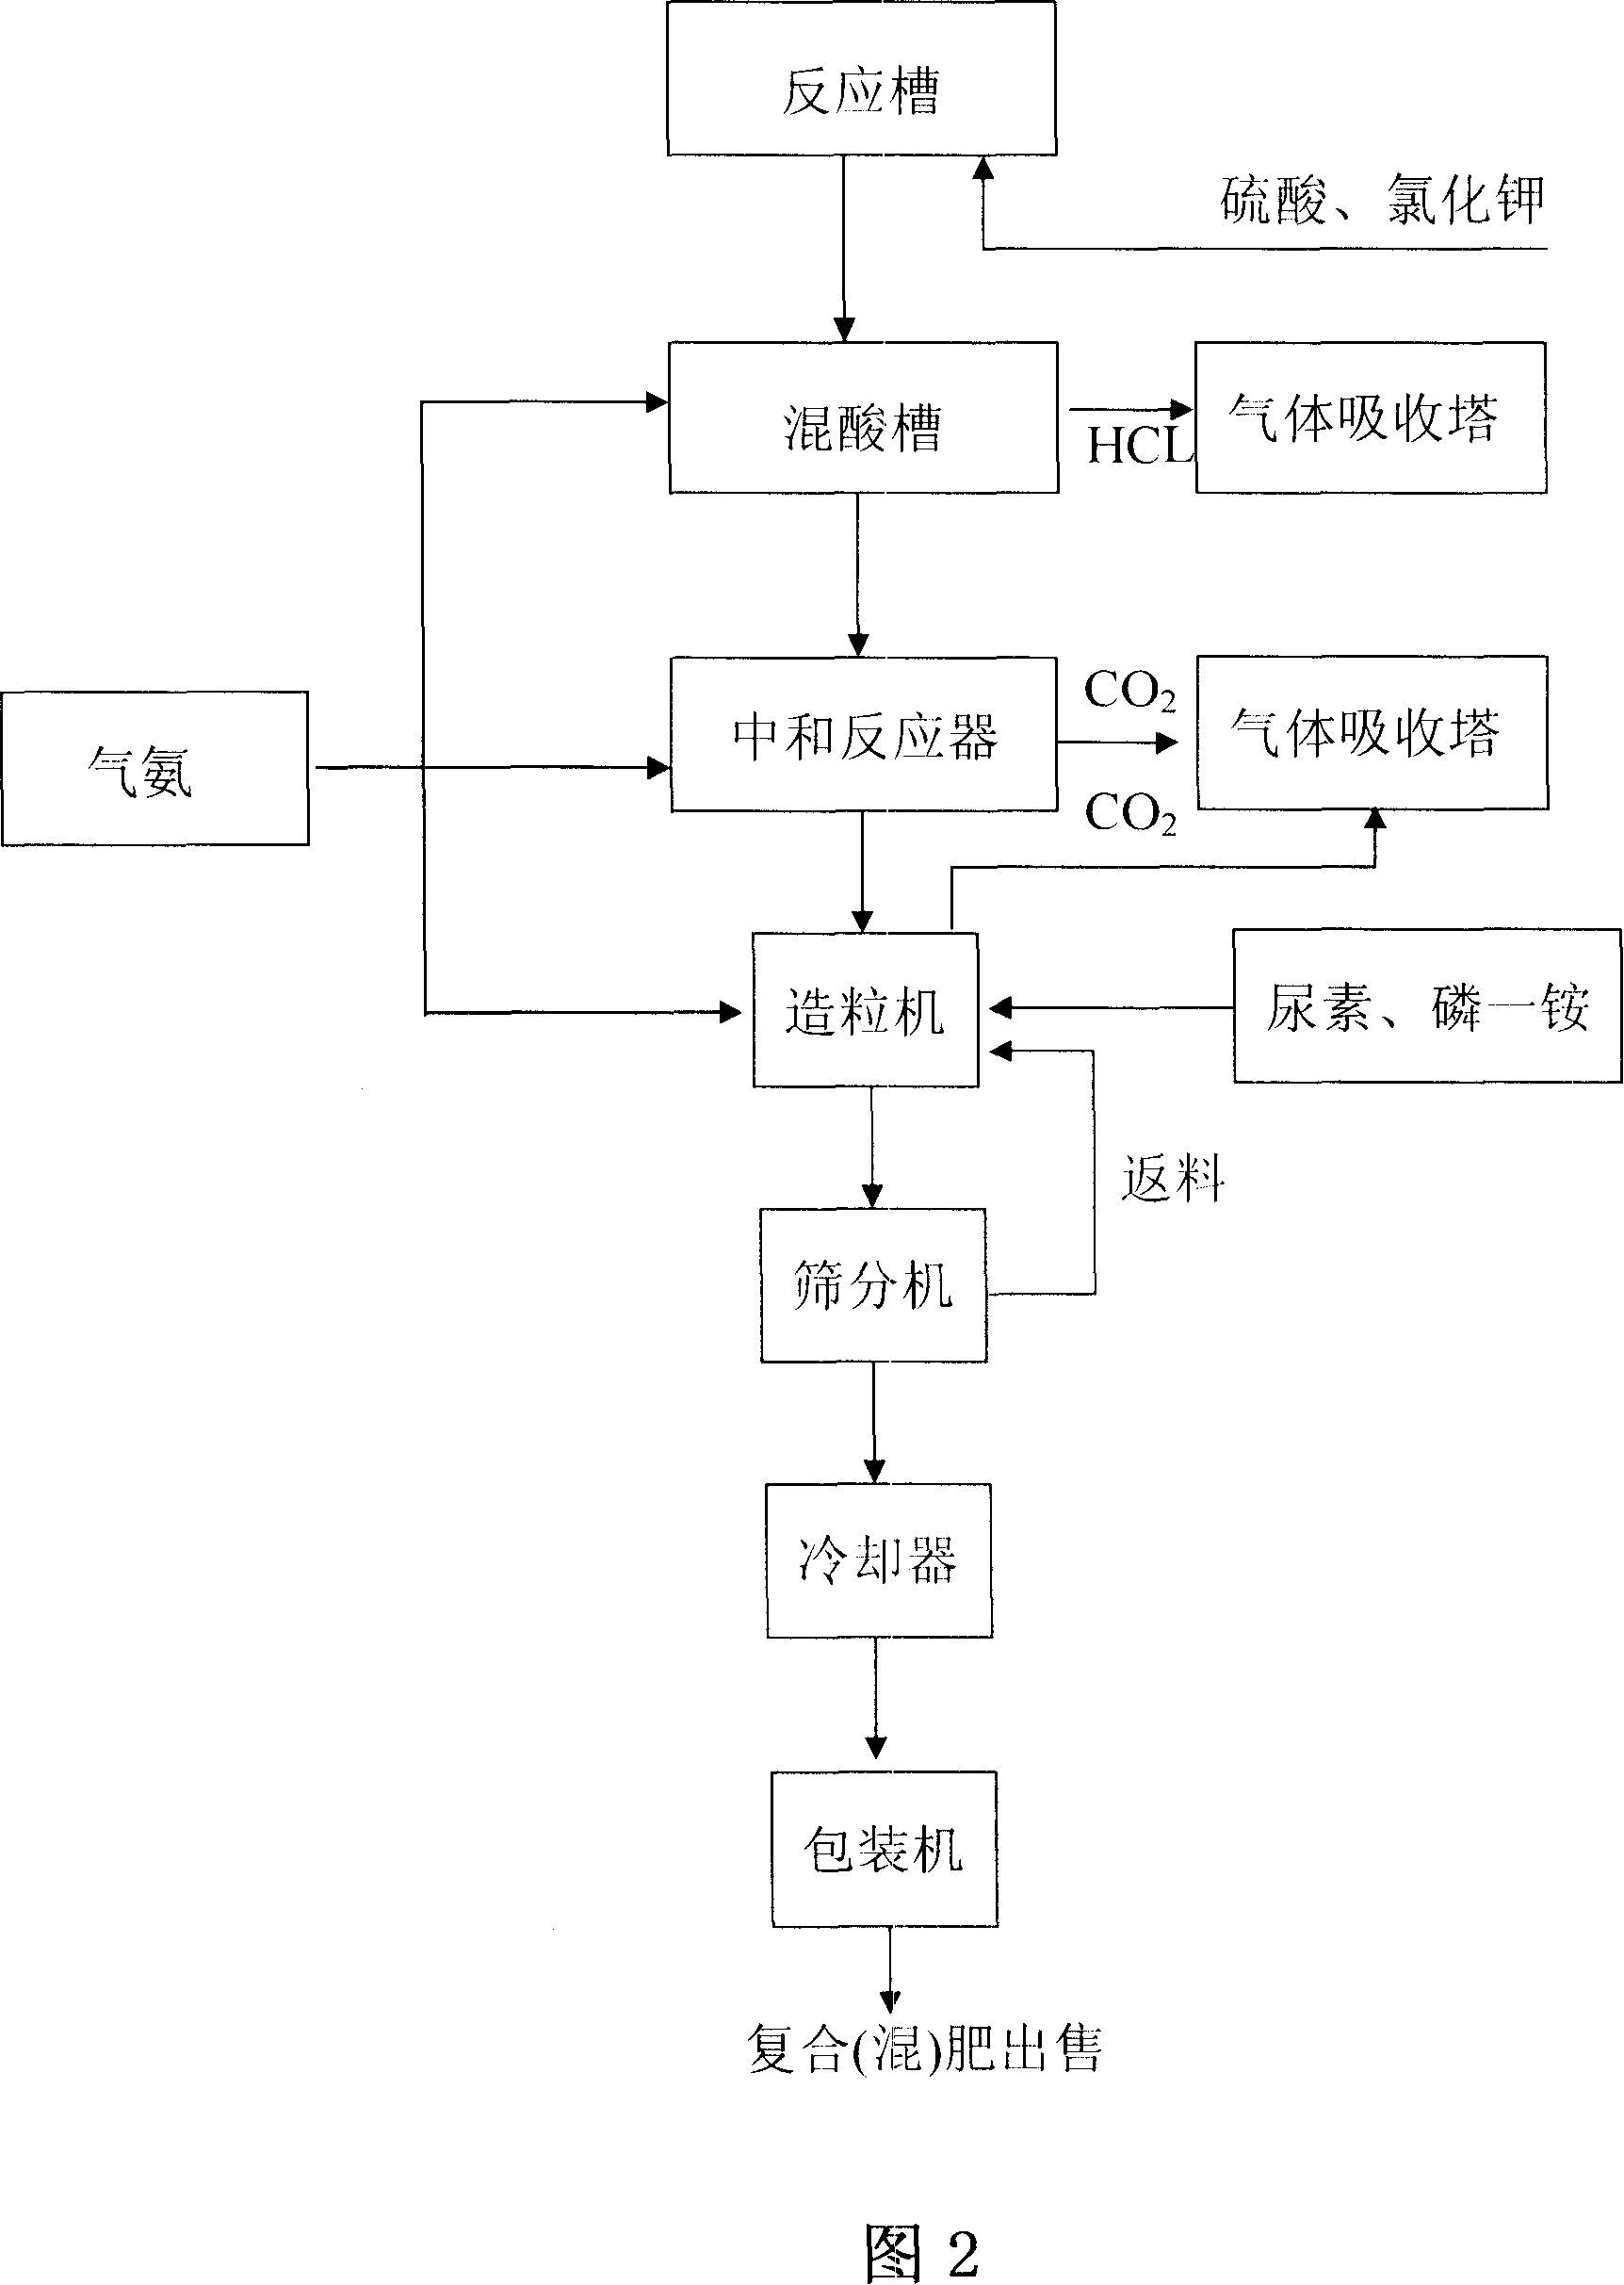 Technique for producing composite (compound) fertilizer by using liquid mixture of ammonia gas, carbon dioxide and water